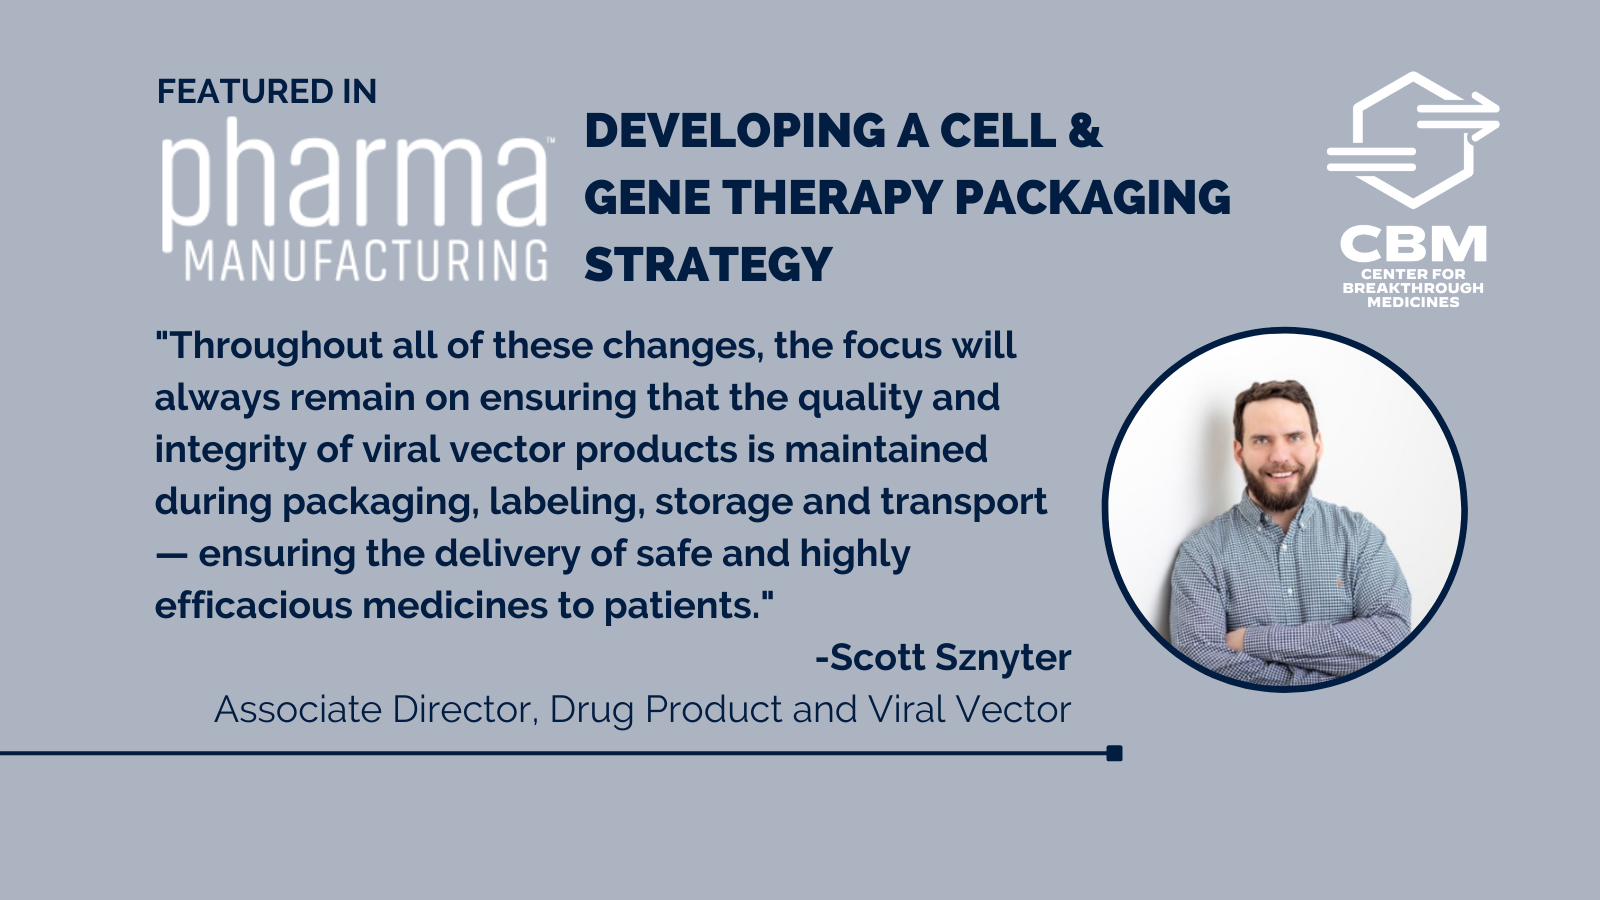 Developing a gene and cell therapy packaging strategy promotional image with Scott Sznyter